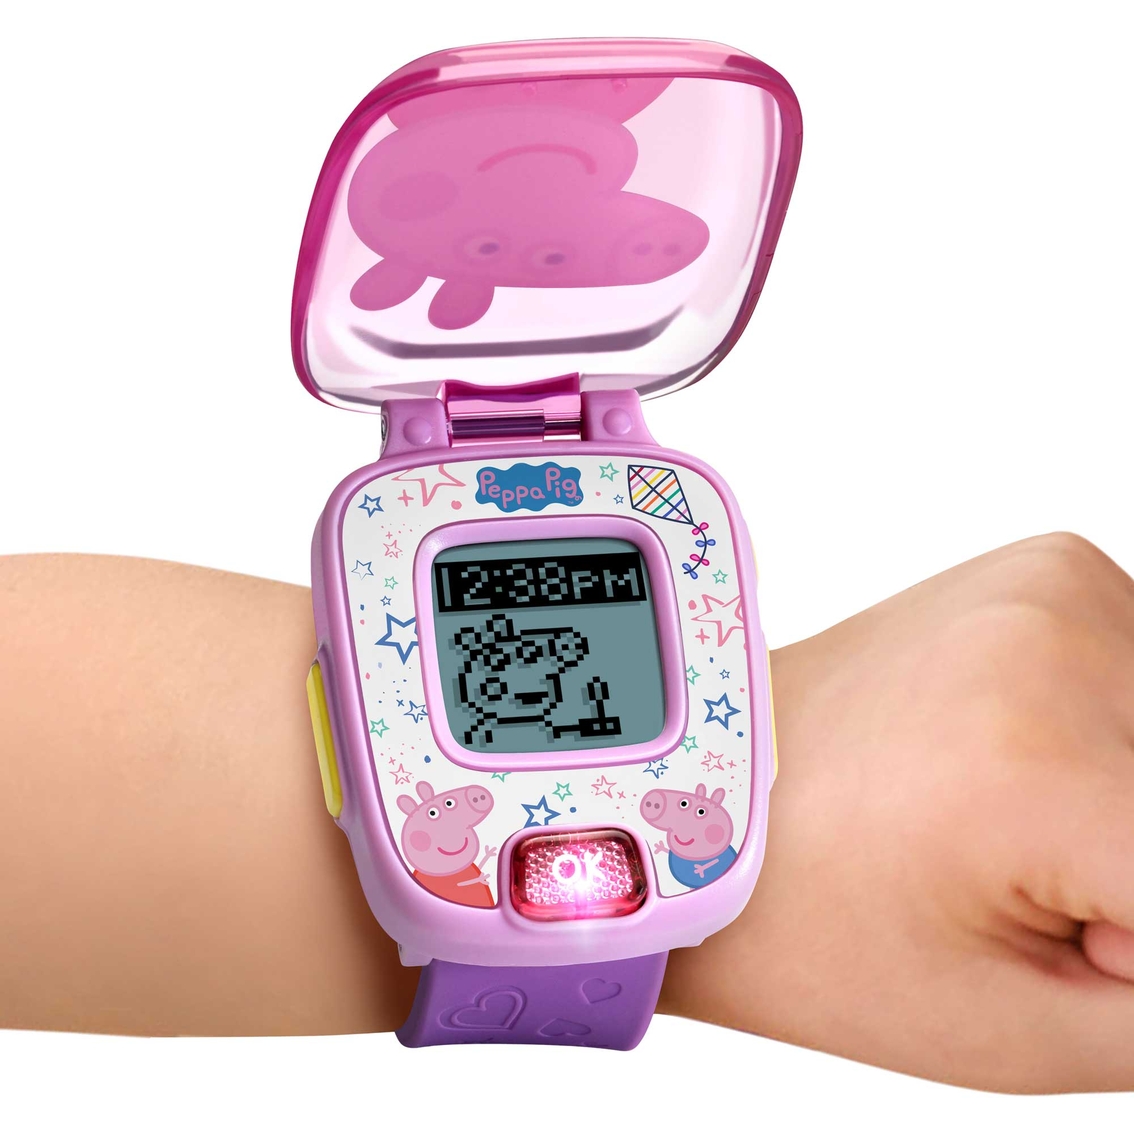 VTech Peppa Pig Learning Watch 80-526000 - Image 5 of 5